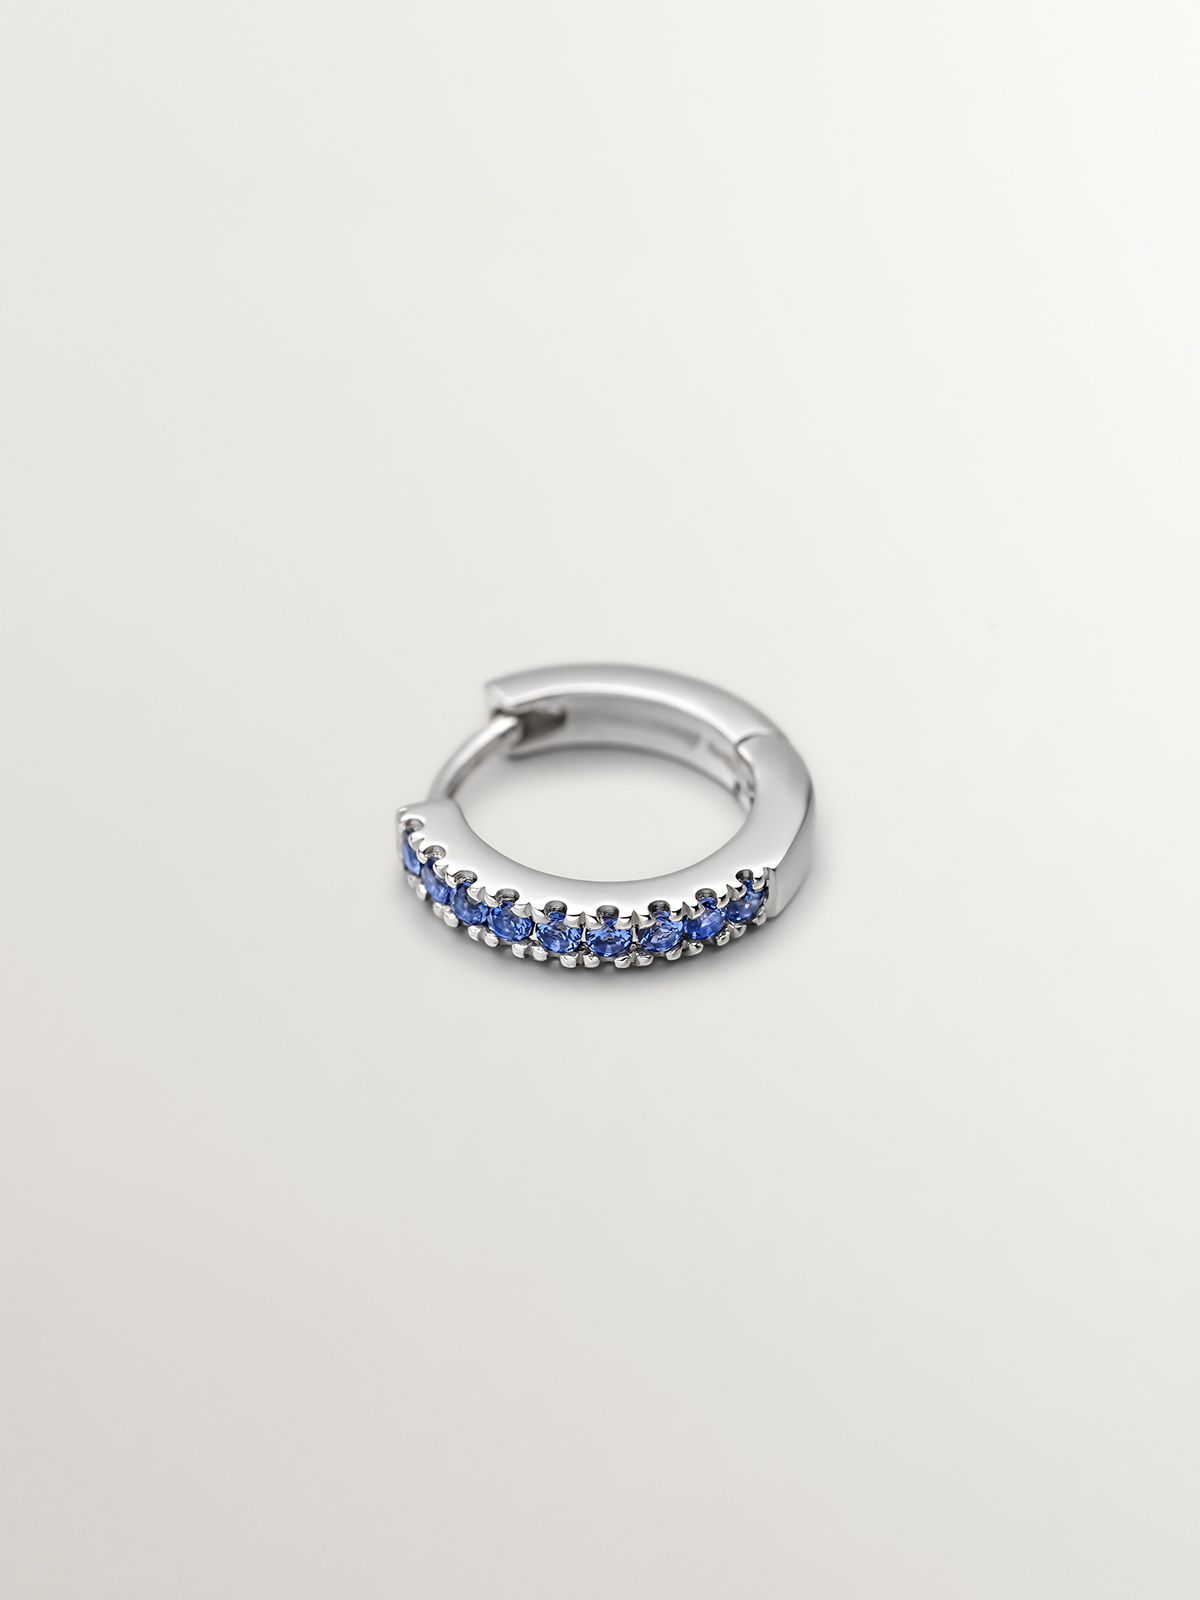 Individual 9K white gold hoop earring with blue sapphires.